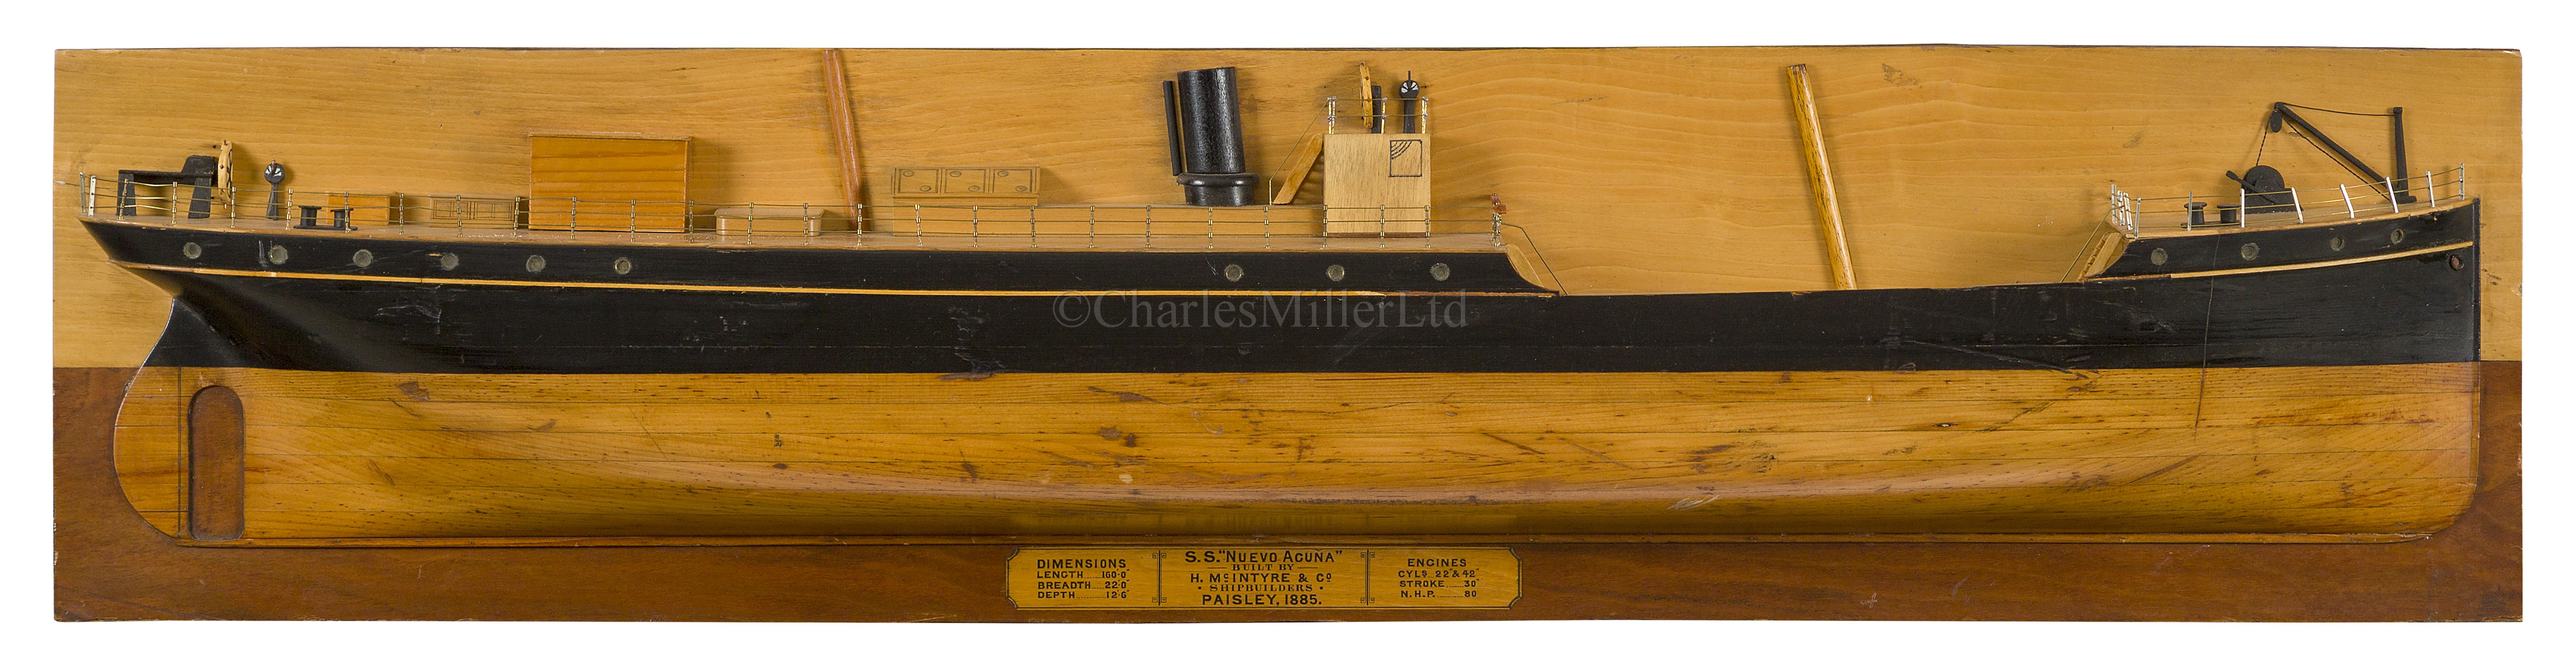 A BUILDER'S HALF-BLOCK MODEL FOR THE S.S NUEVO ACUNA, BUILT BY H. MCINTYRE & CO., PAISLEY, 1885